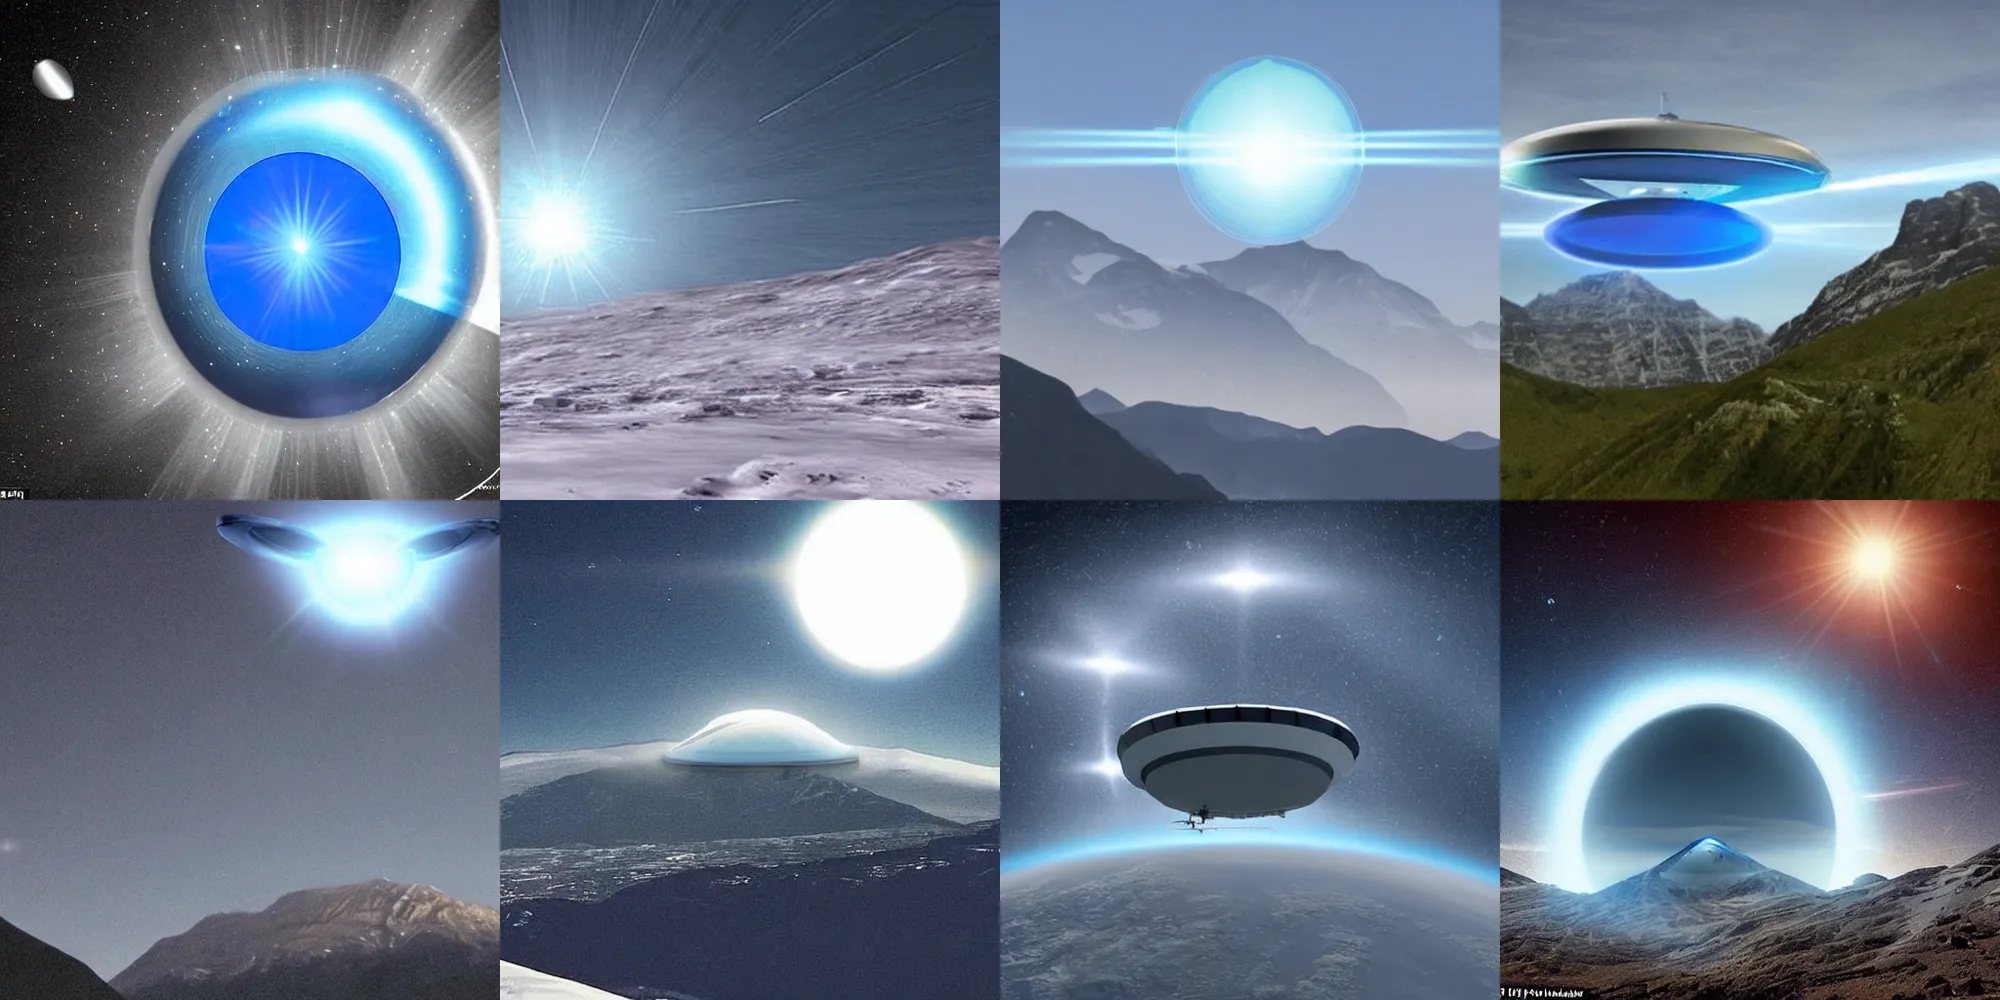 Prompt: the photo shows a large, silver disk shaped ufo hovering in the sky above a mountain range. the object appears to be surrounded by a bright glowing blue aura. there is no sign of any engines or propulsion system